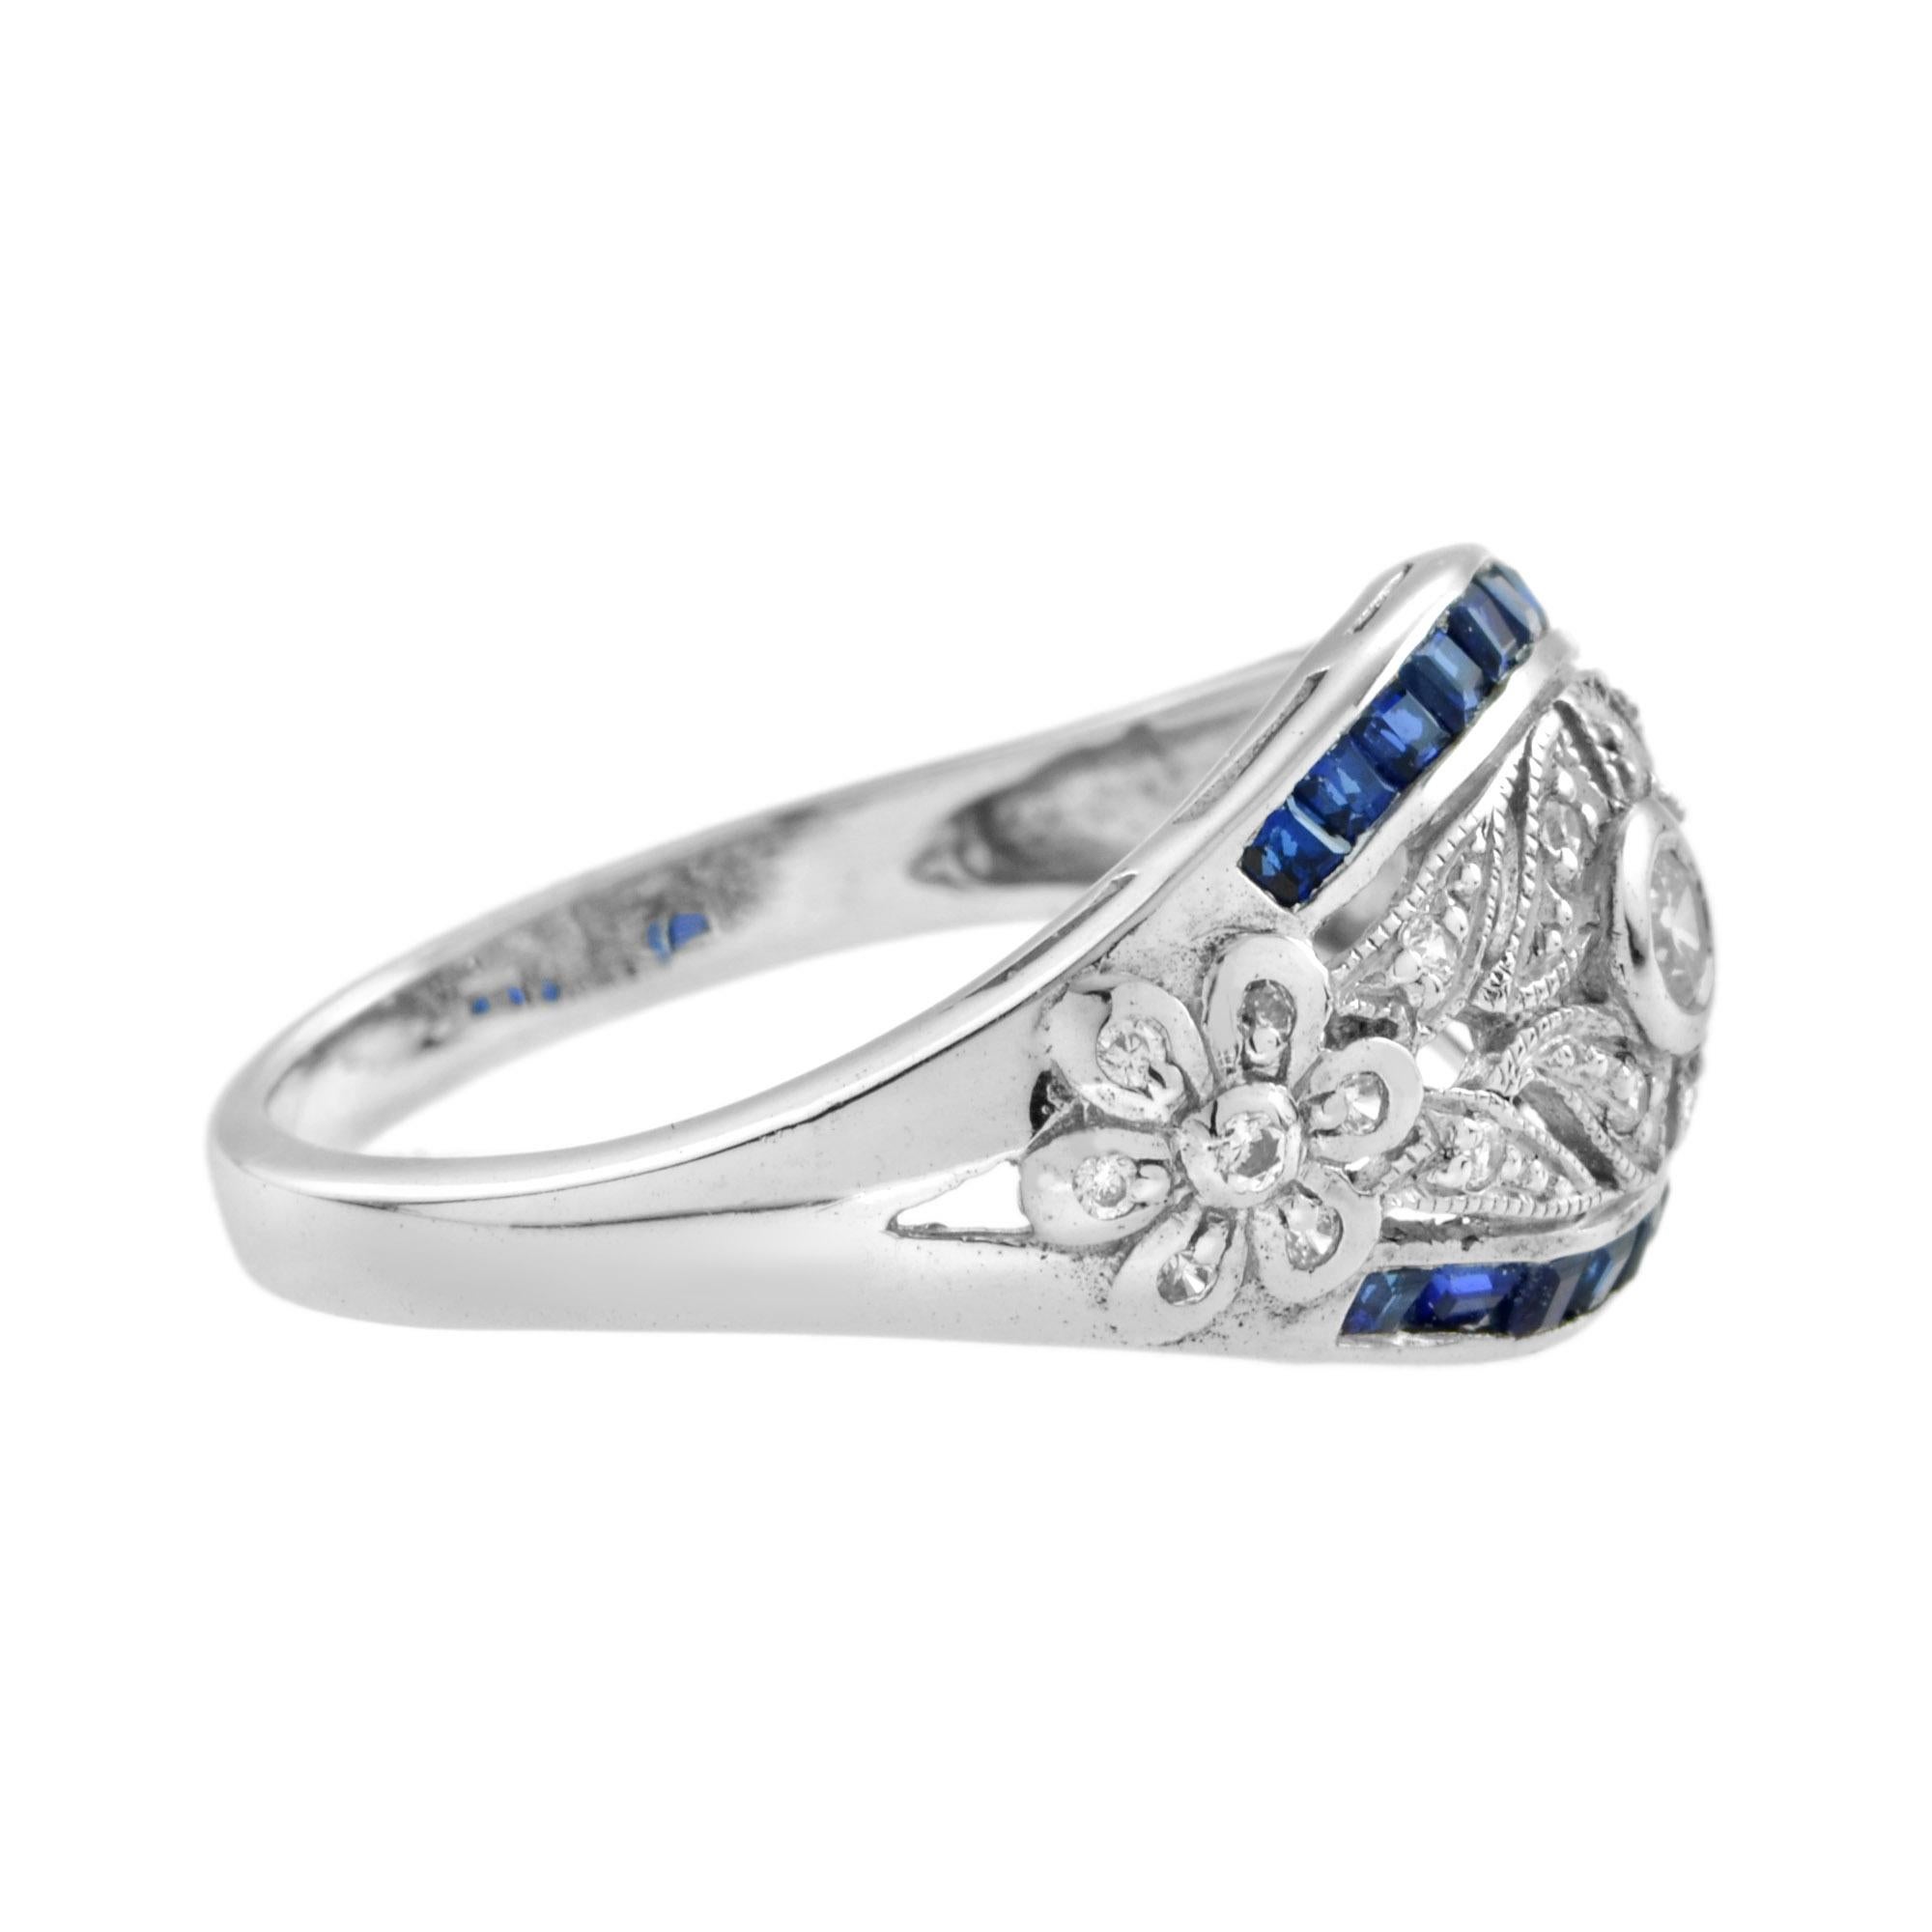 For Sale:  Art Deco Style Diamond and Sapphire Ring in 14K White Gold 4